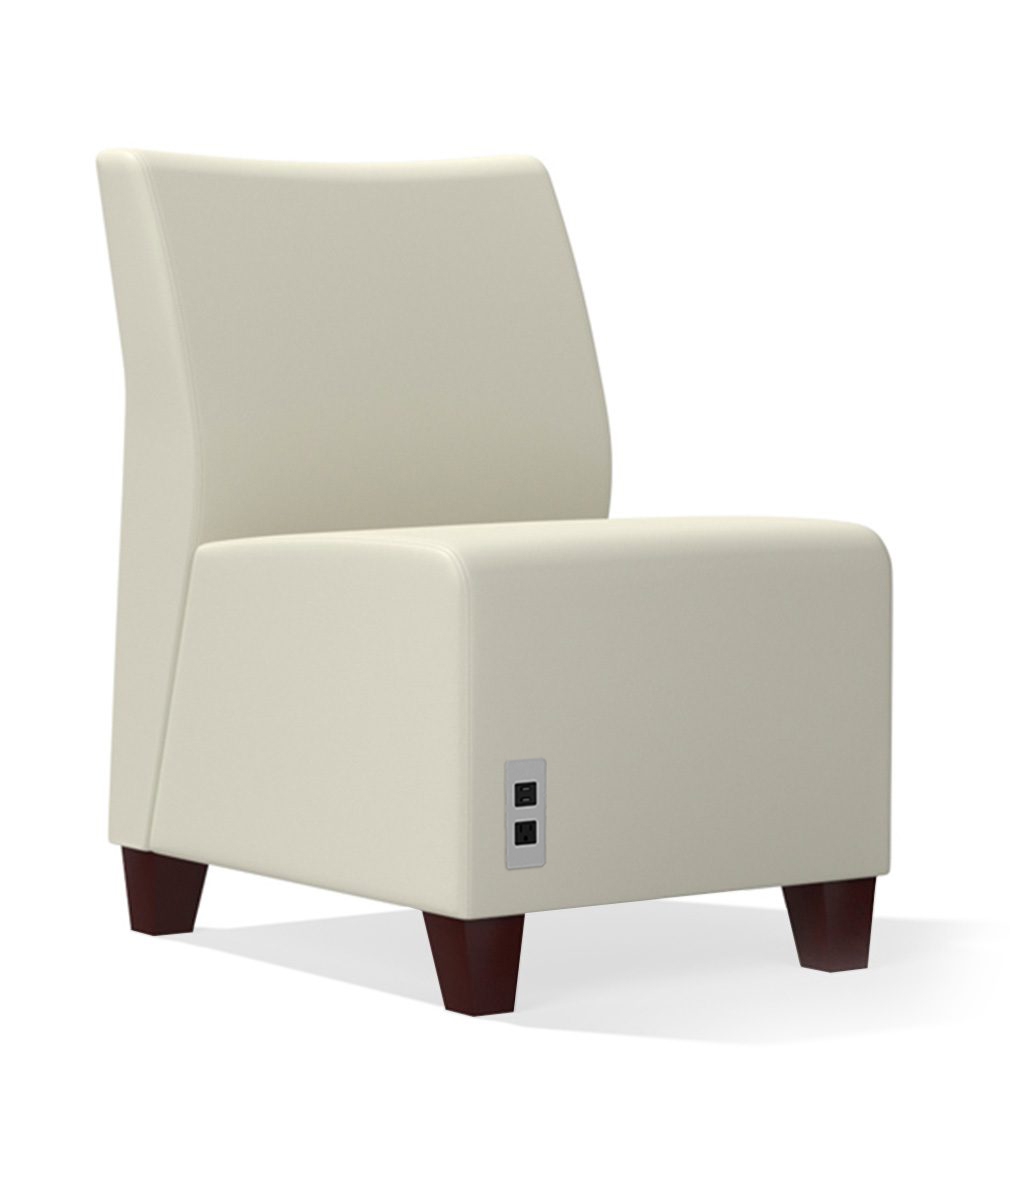 SitOnIt Seating, Lounge, With contemporary aesthetics the Visit Modular collection features flexible modularity and arm